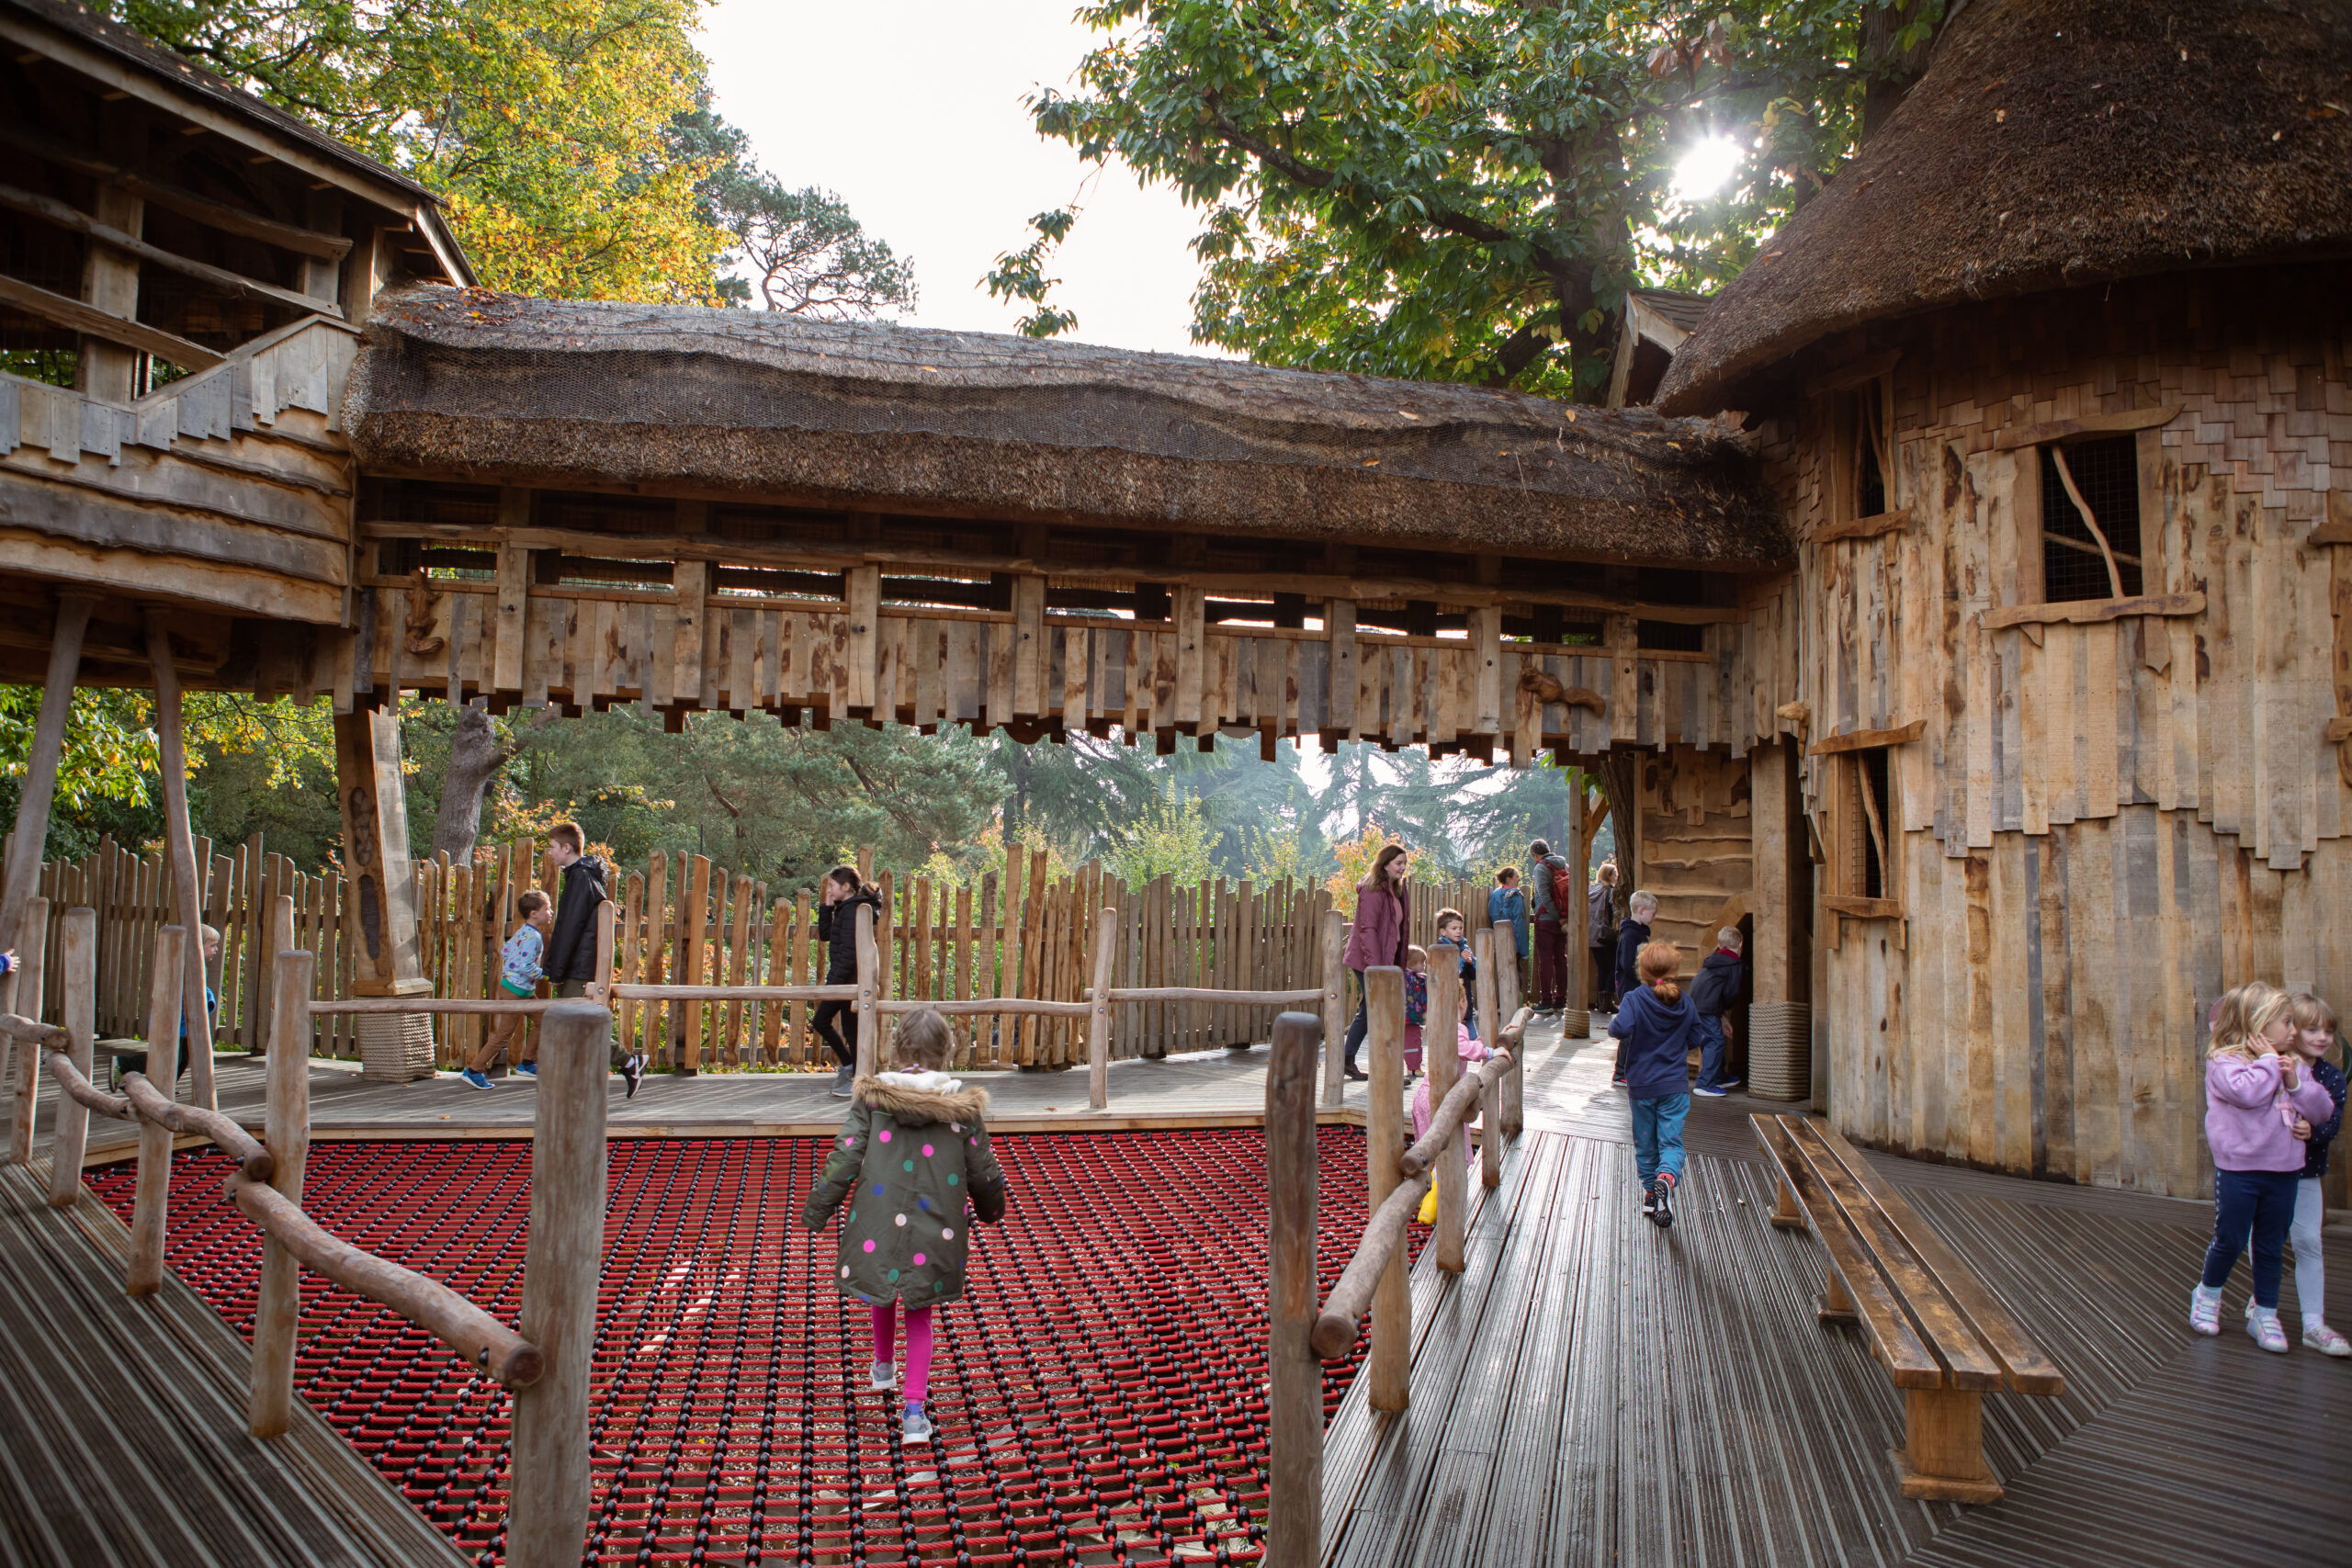 Young child walking across a red net floor surrounded by other children on a wooden walkway.